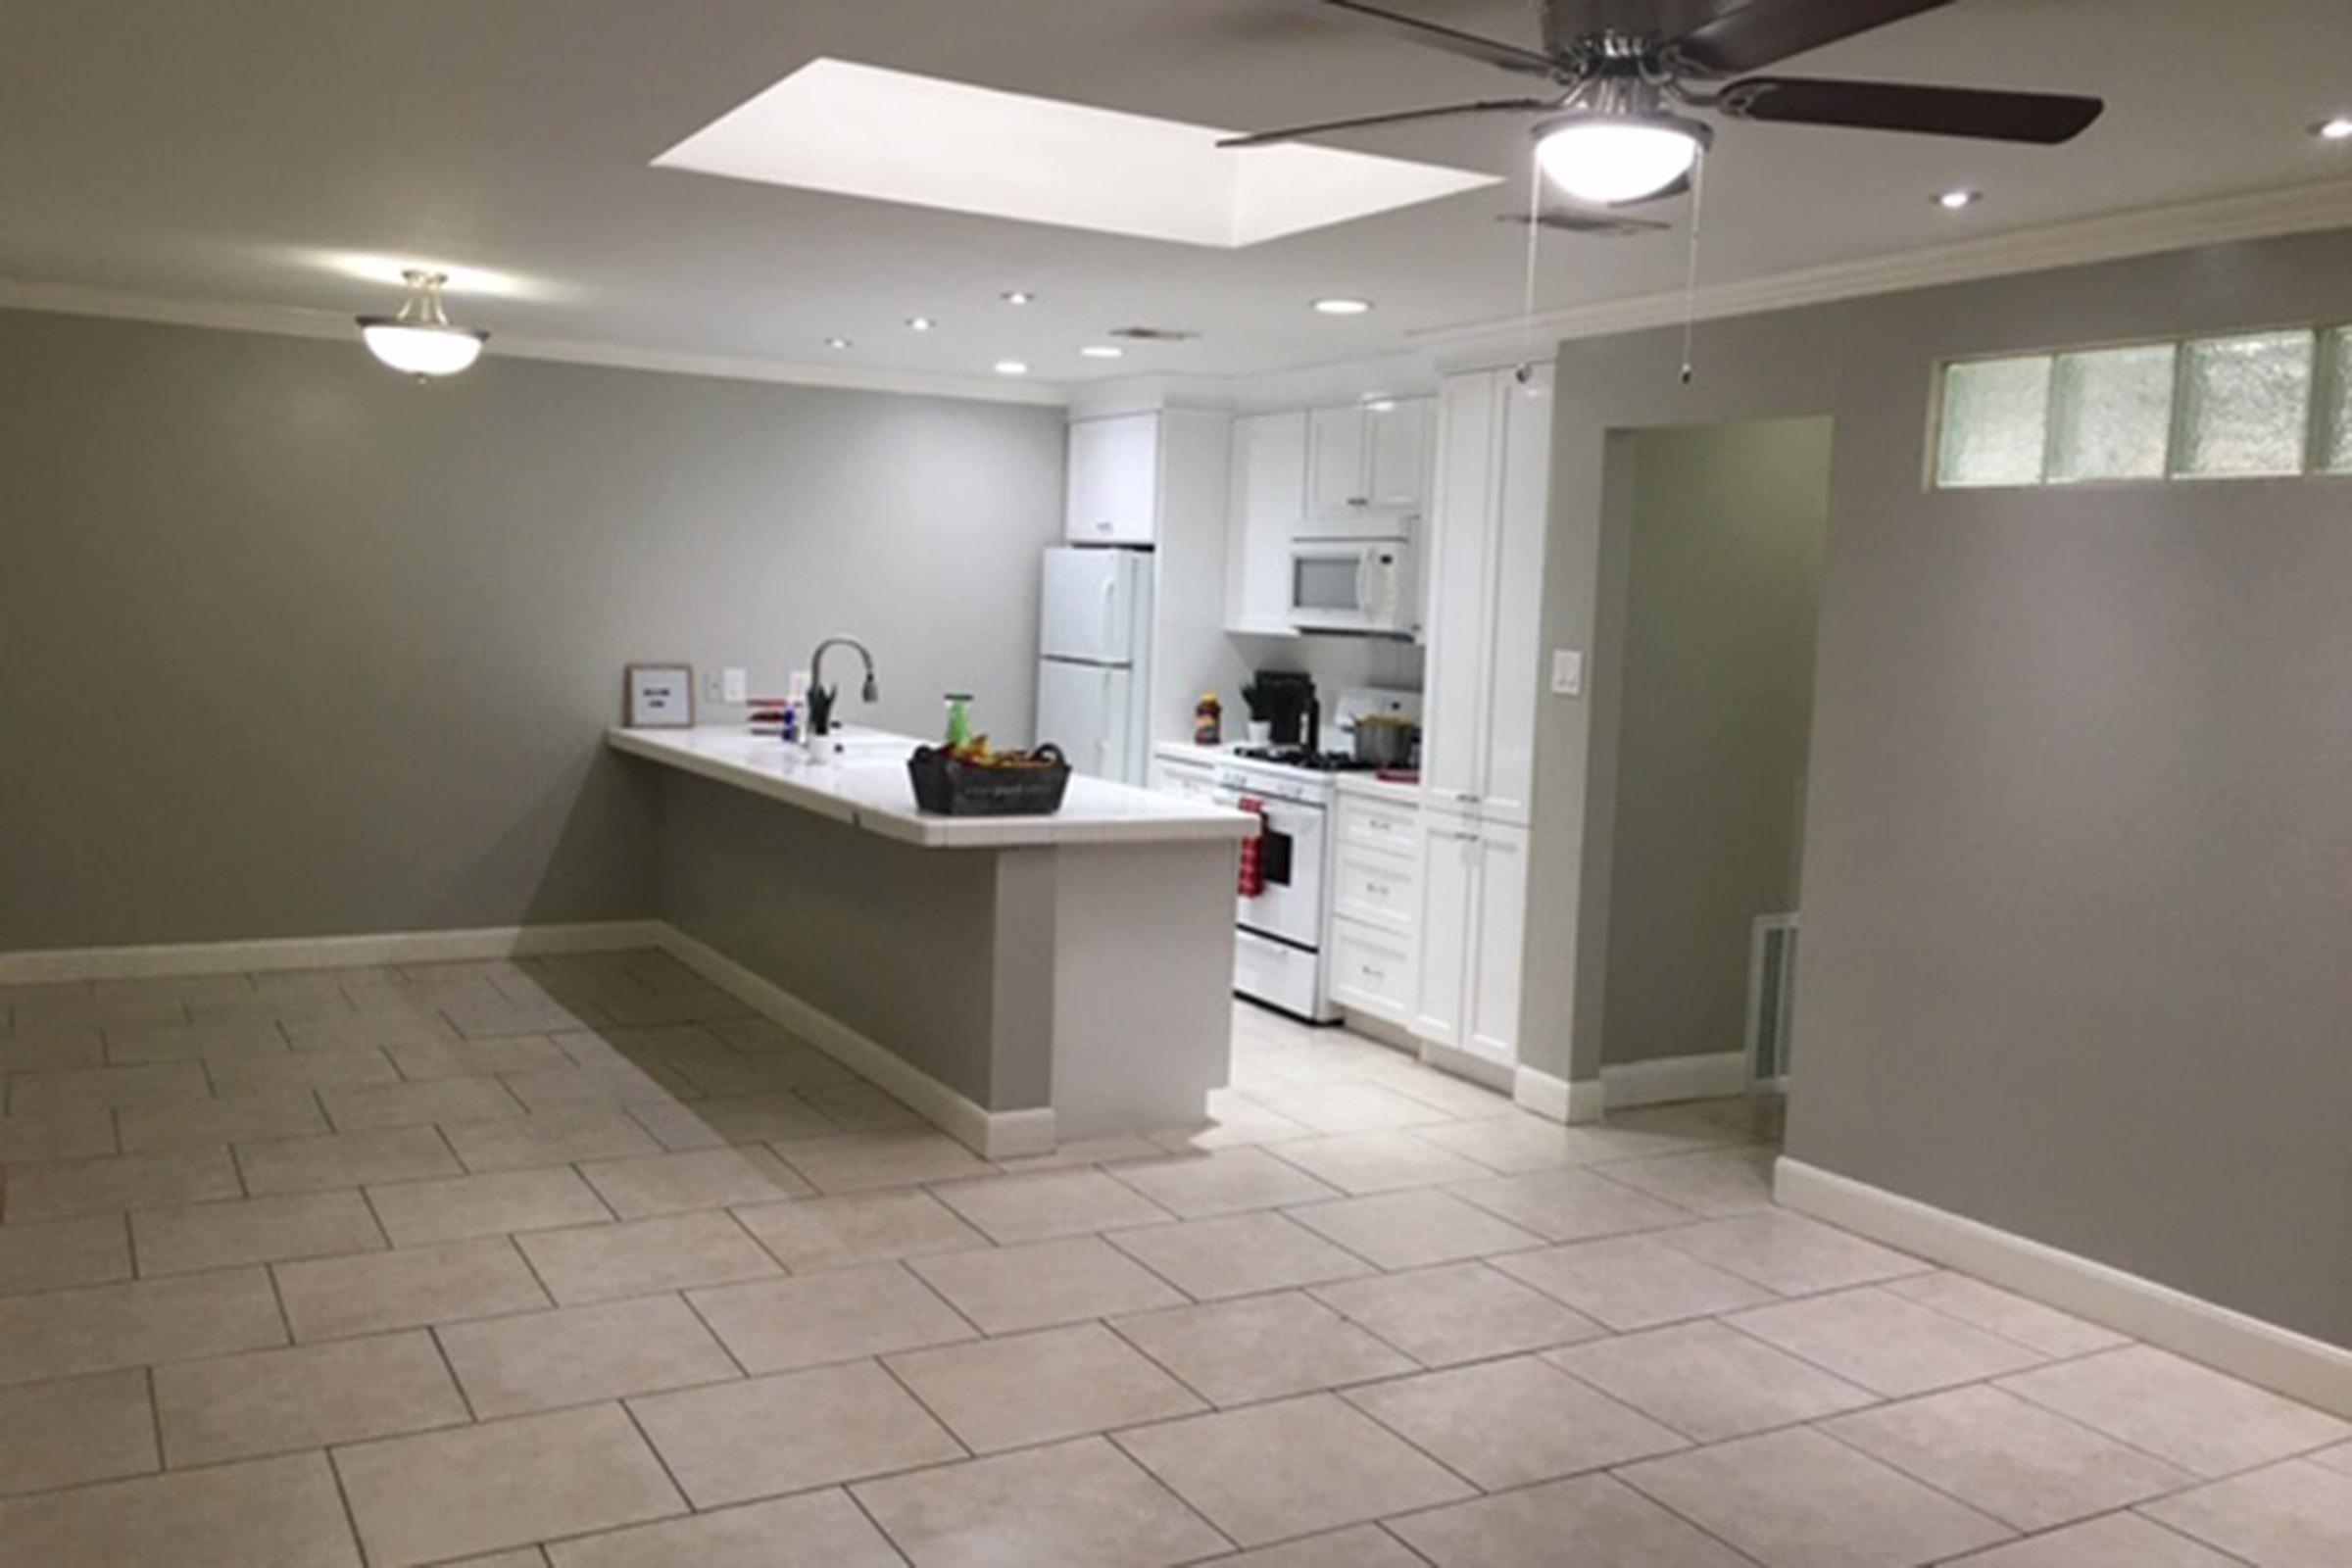 a kitchen with a tile floor